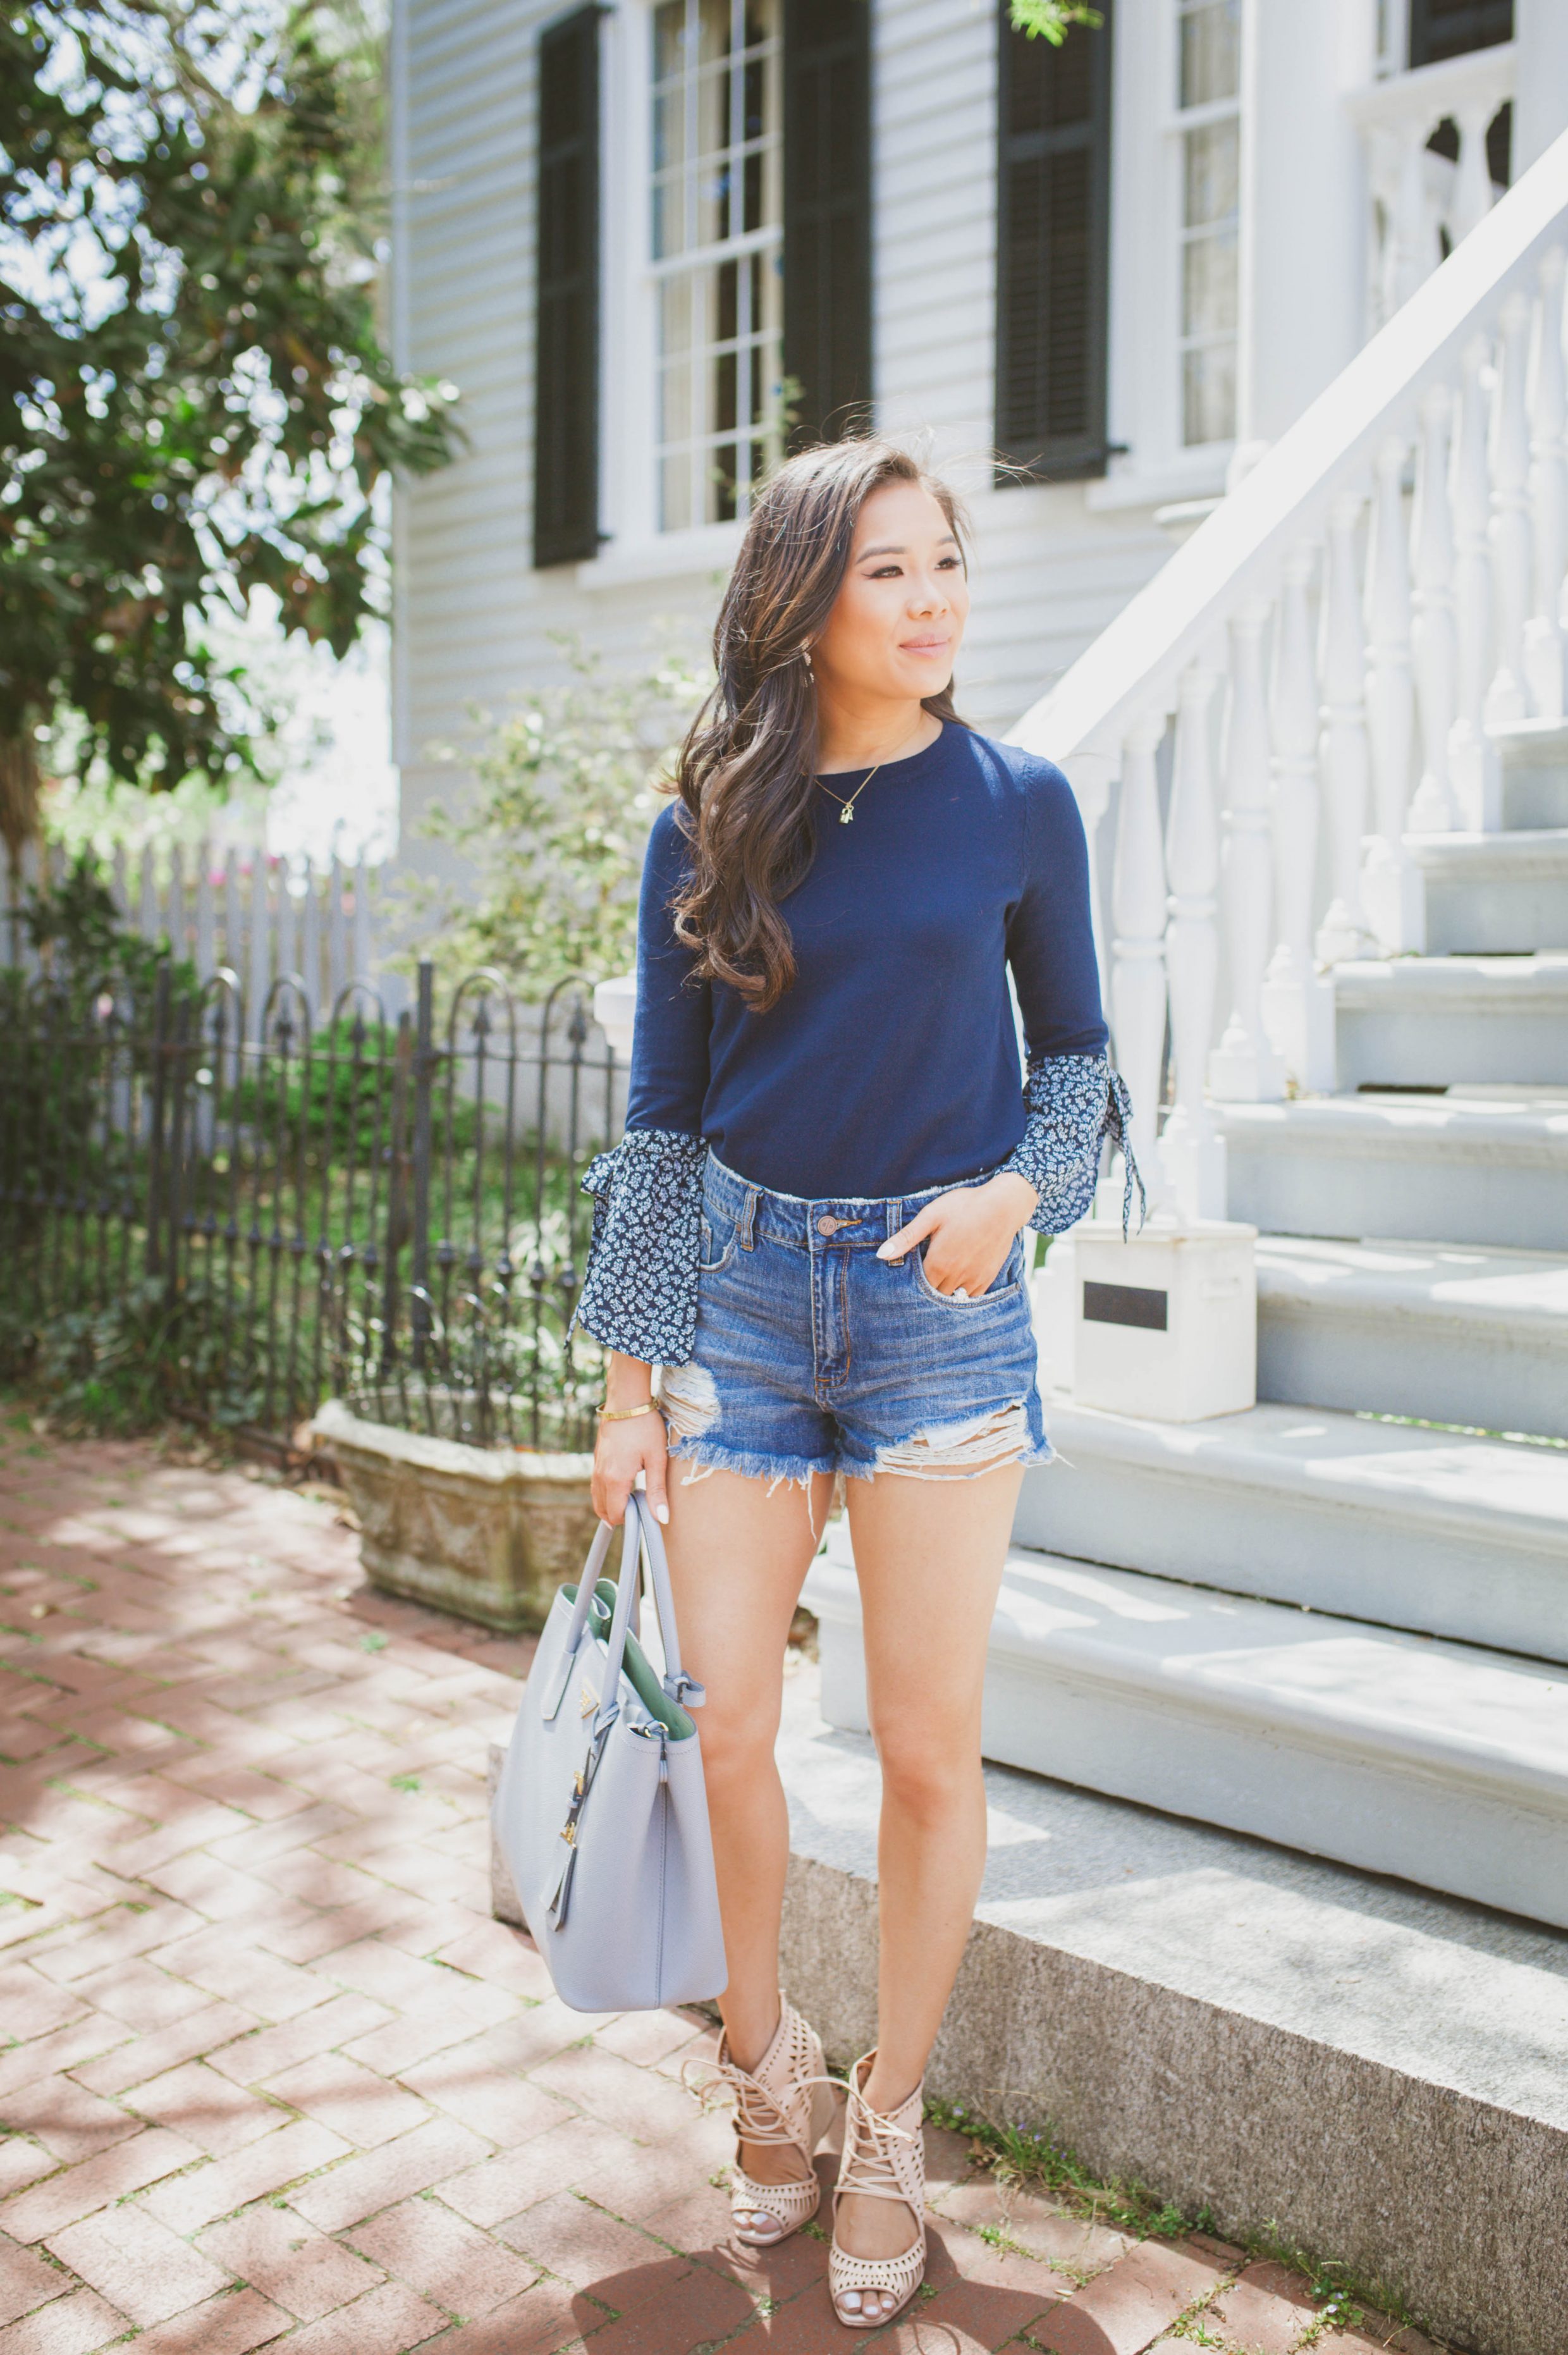 Hoang-Kim wears a navy floral tie-cuff sleeve top with distressed jeans for spring and Jeffrey Campbell wedges